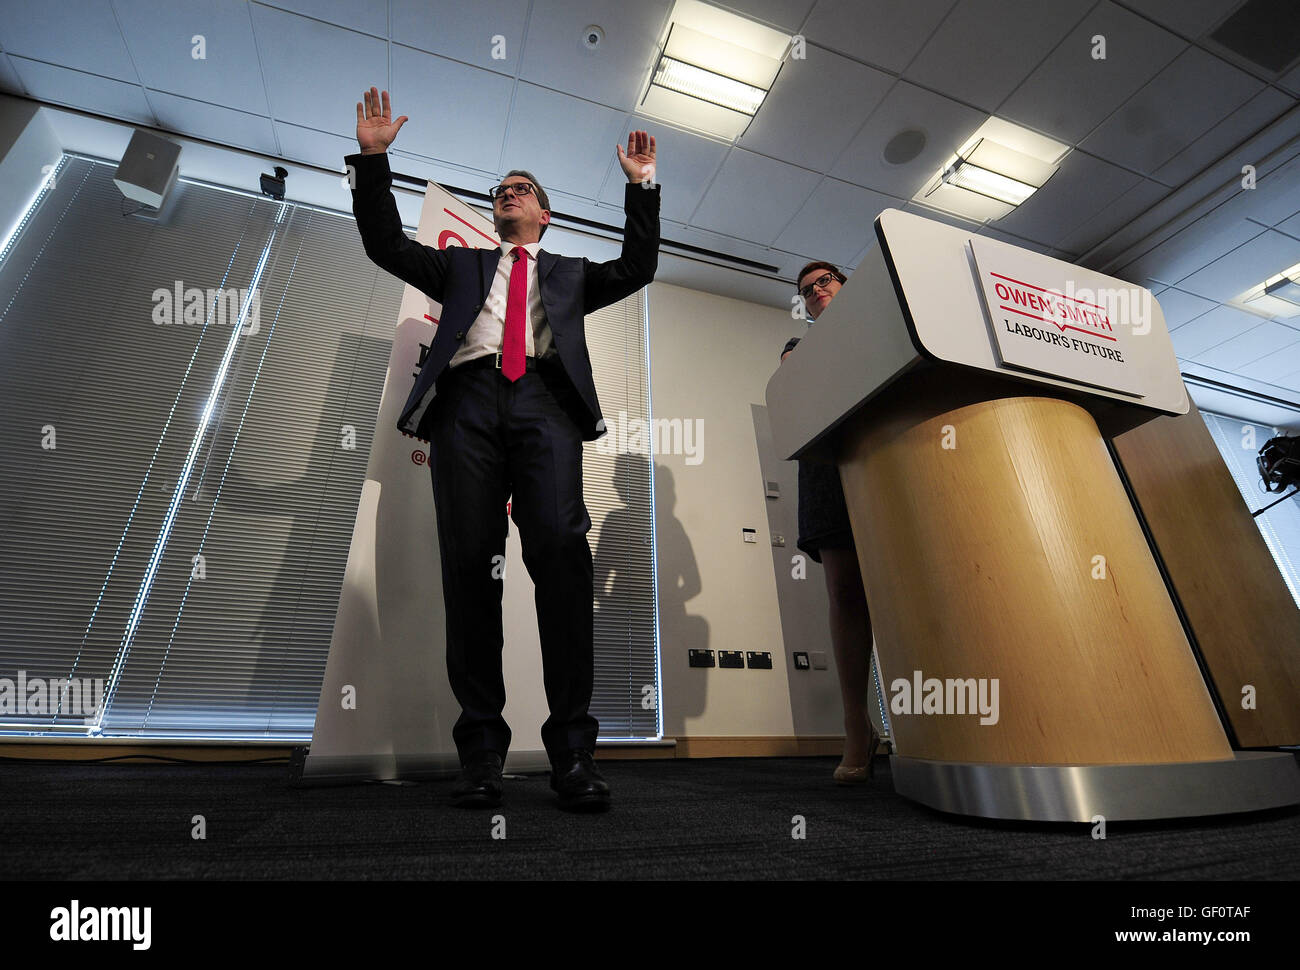 Labour leadership contender Owen Smith speaks at the Knowledge Transfer Centre in Catcliffe, South Yorkshire, where he committed himself to greater equality at work, announcing plans to appoint a cabinet-level minister to deliver fair employment. Stock Photo